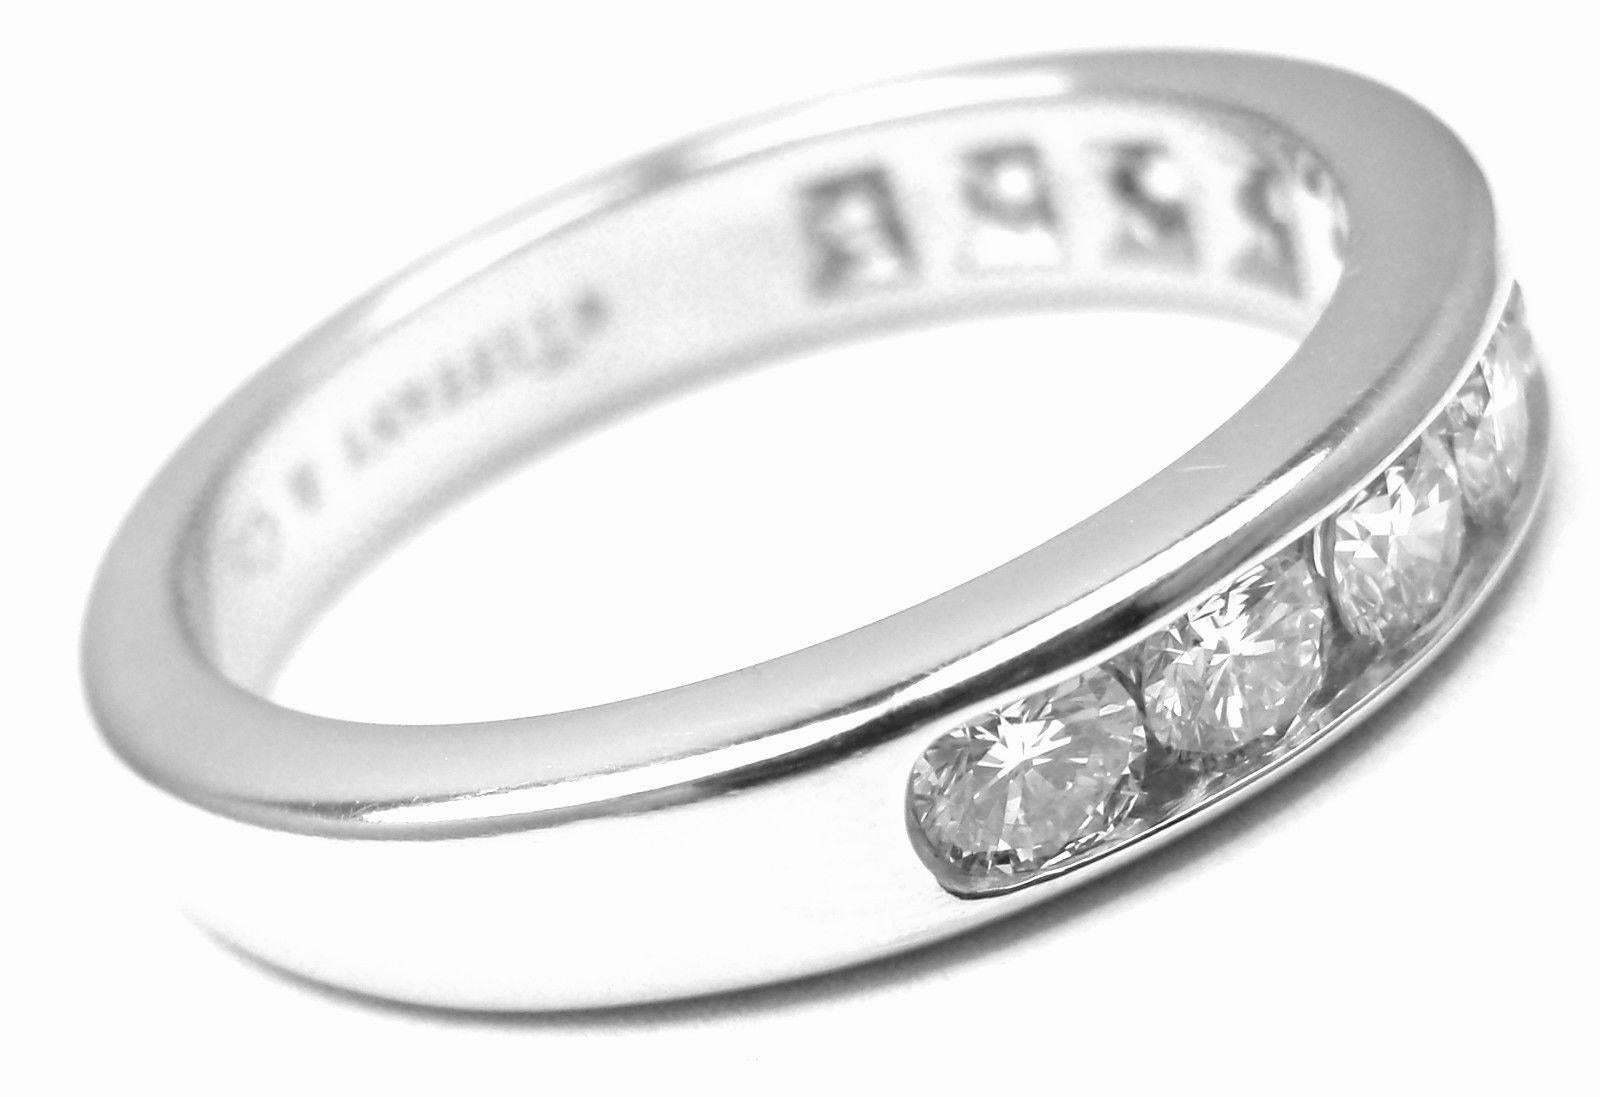 Tiffany & Co. Platinum Diamond Half Circle 4mm Band Ring.  
With 10 Round brilliant cut diamonds VS1 clarity, E color total weight approx. .90ct

Measurements:  
Ring Size: 7
Weight: 7.6 grams 
Width: 4mm
Stamped Hallmarks: Tiffany&Co